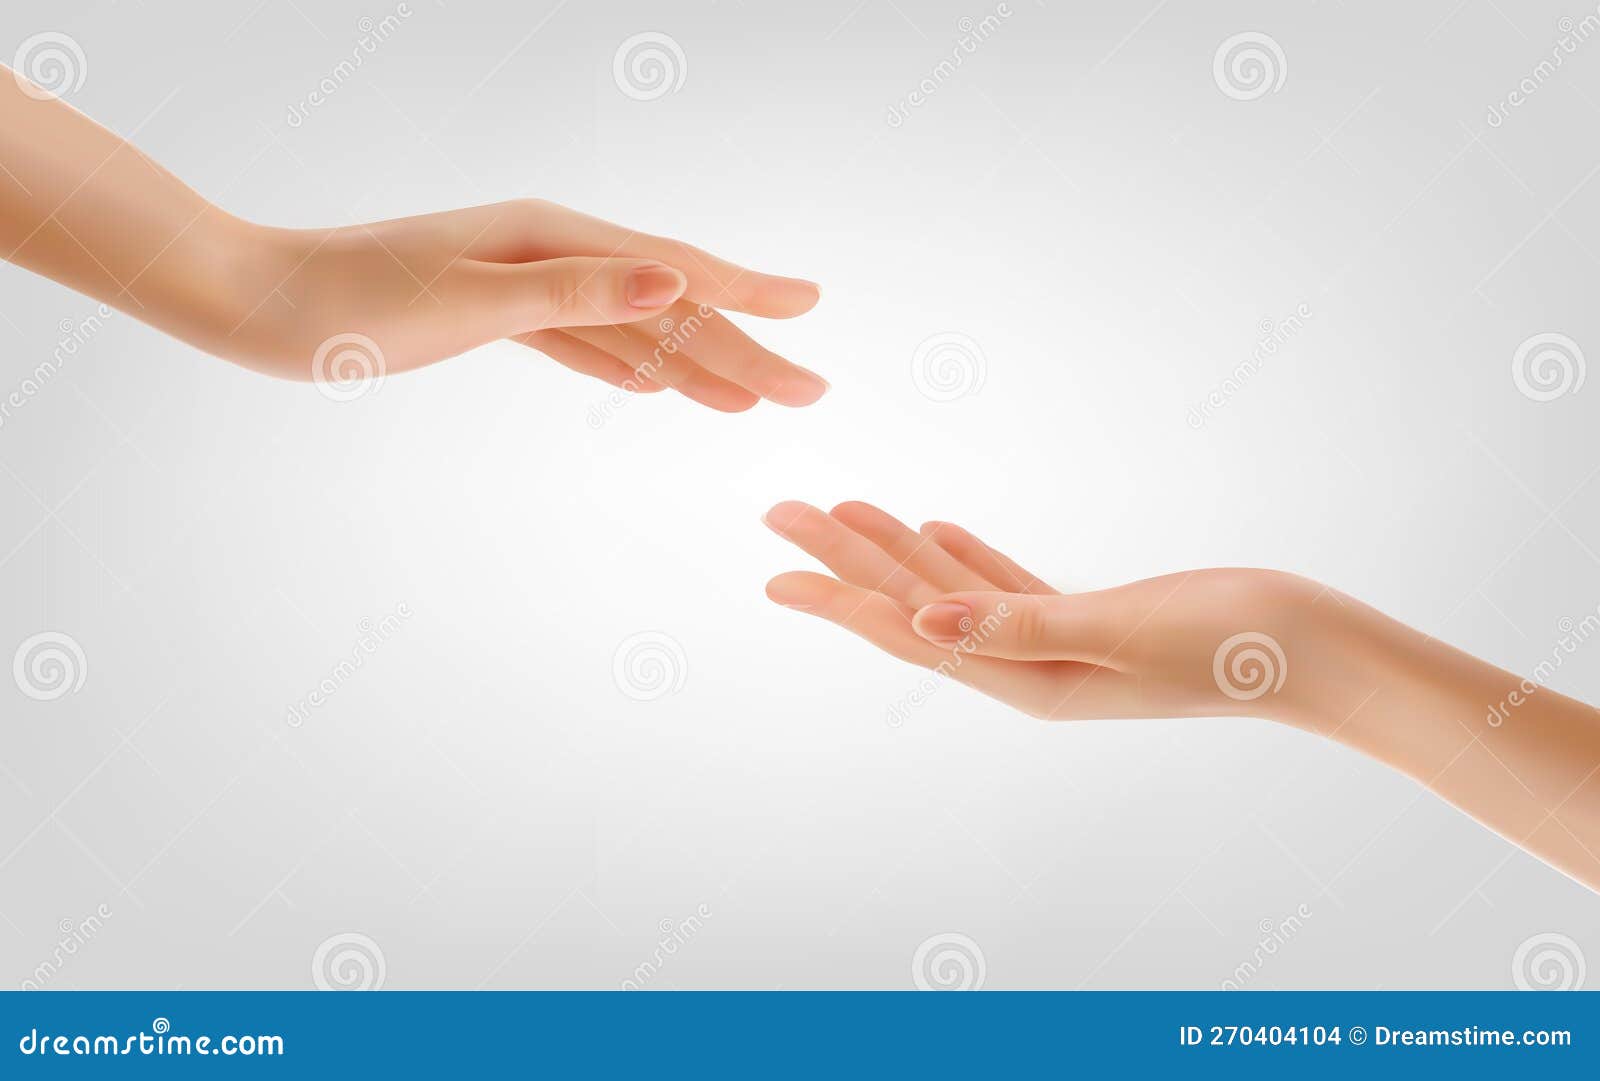 two hands touching people helping each other with their fingertips. giving a helping hand concept. concept of human relation,